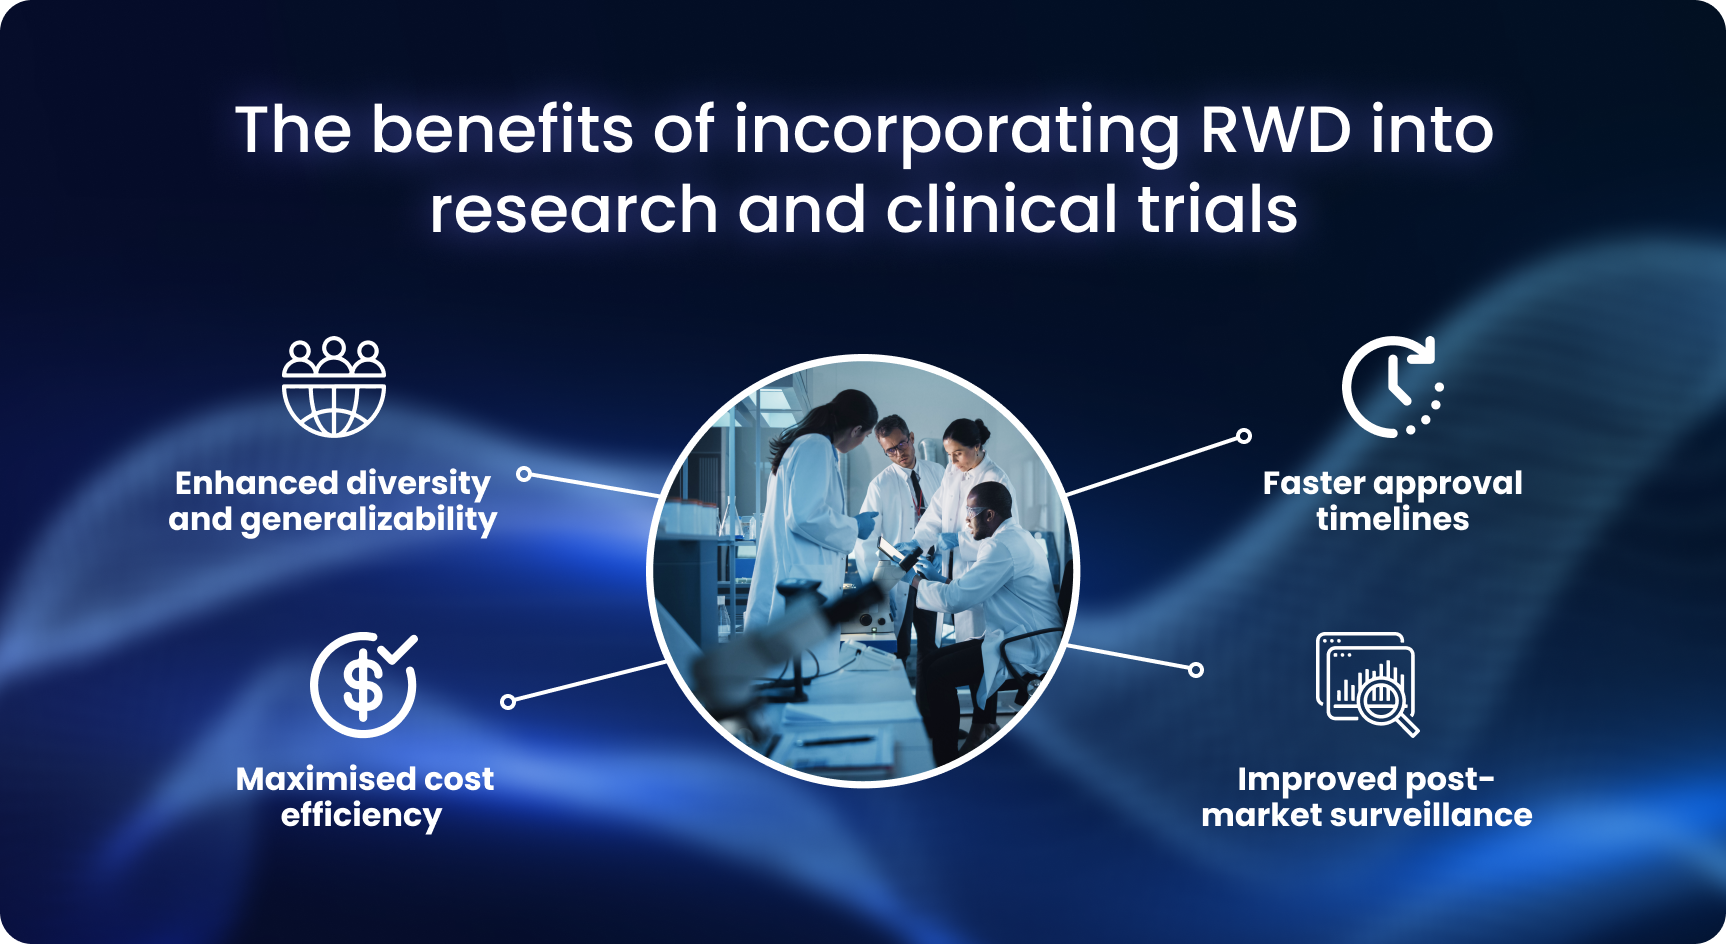 Using RWD in clinical research and trials can bring many benefits to these processes